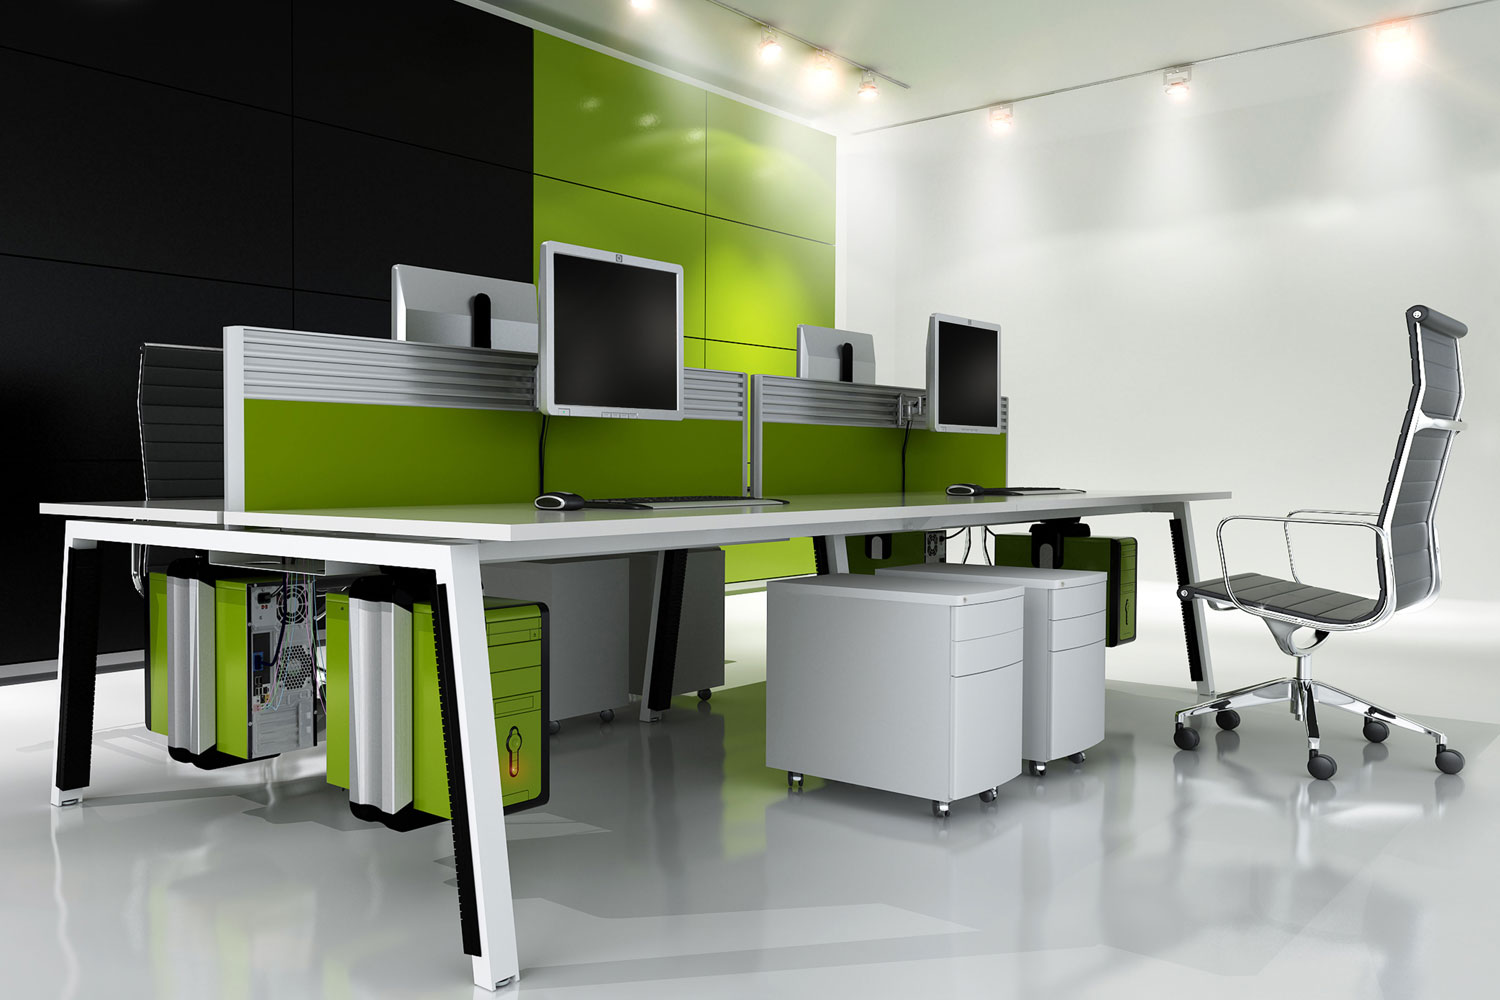 Green and black themed office interior with contemporary furniture